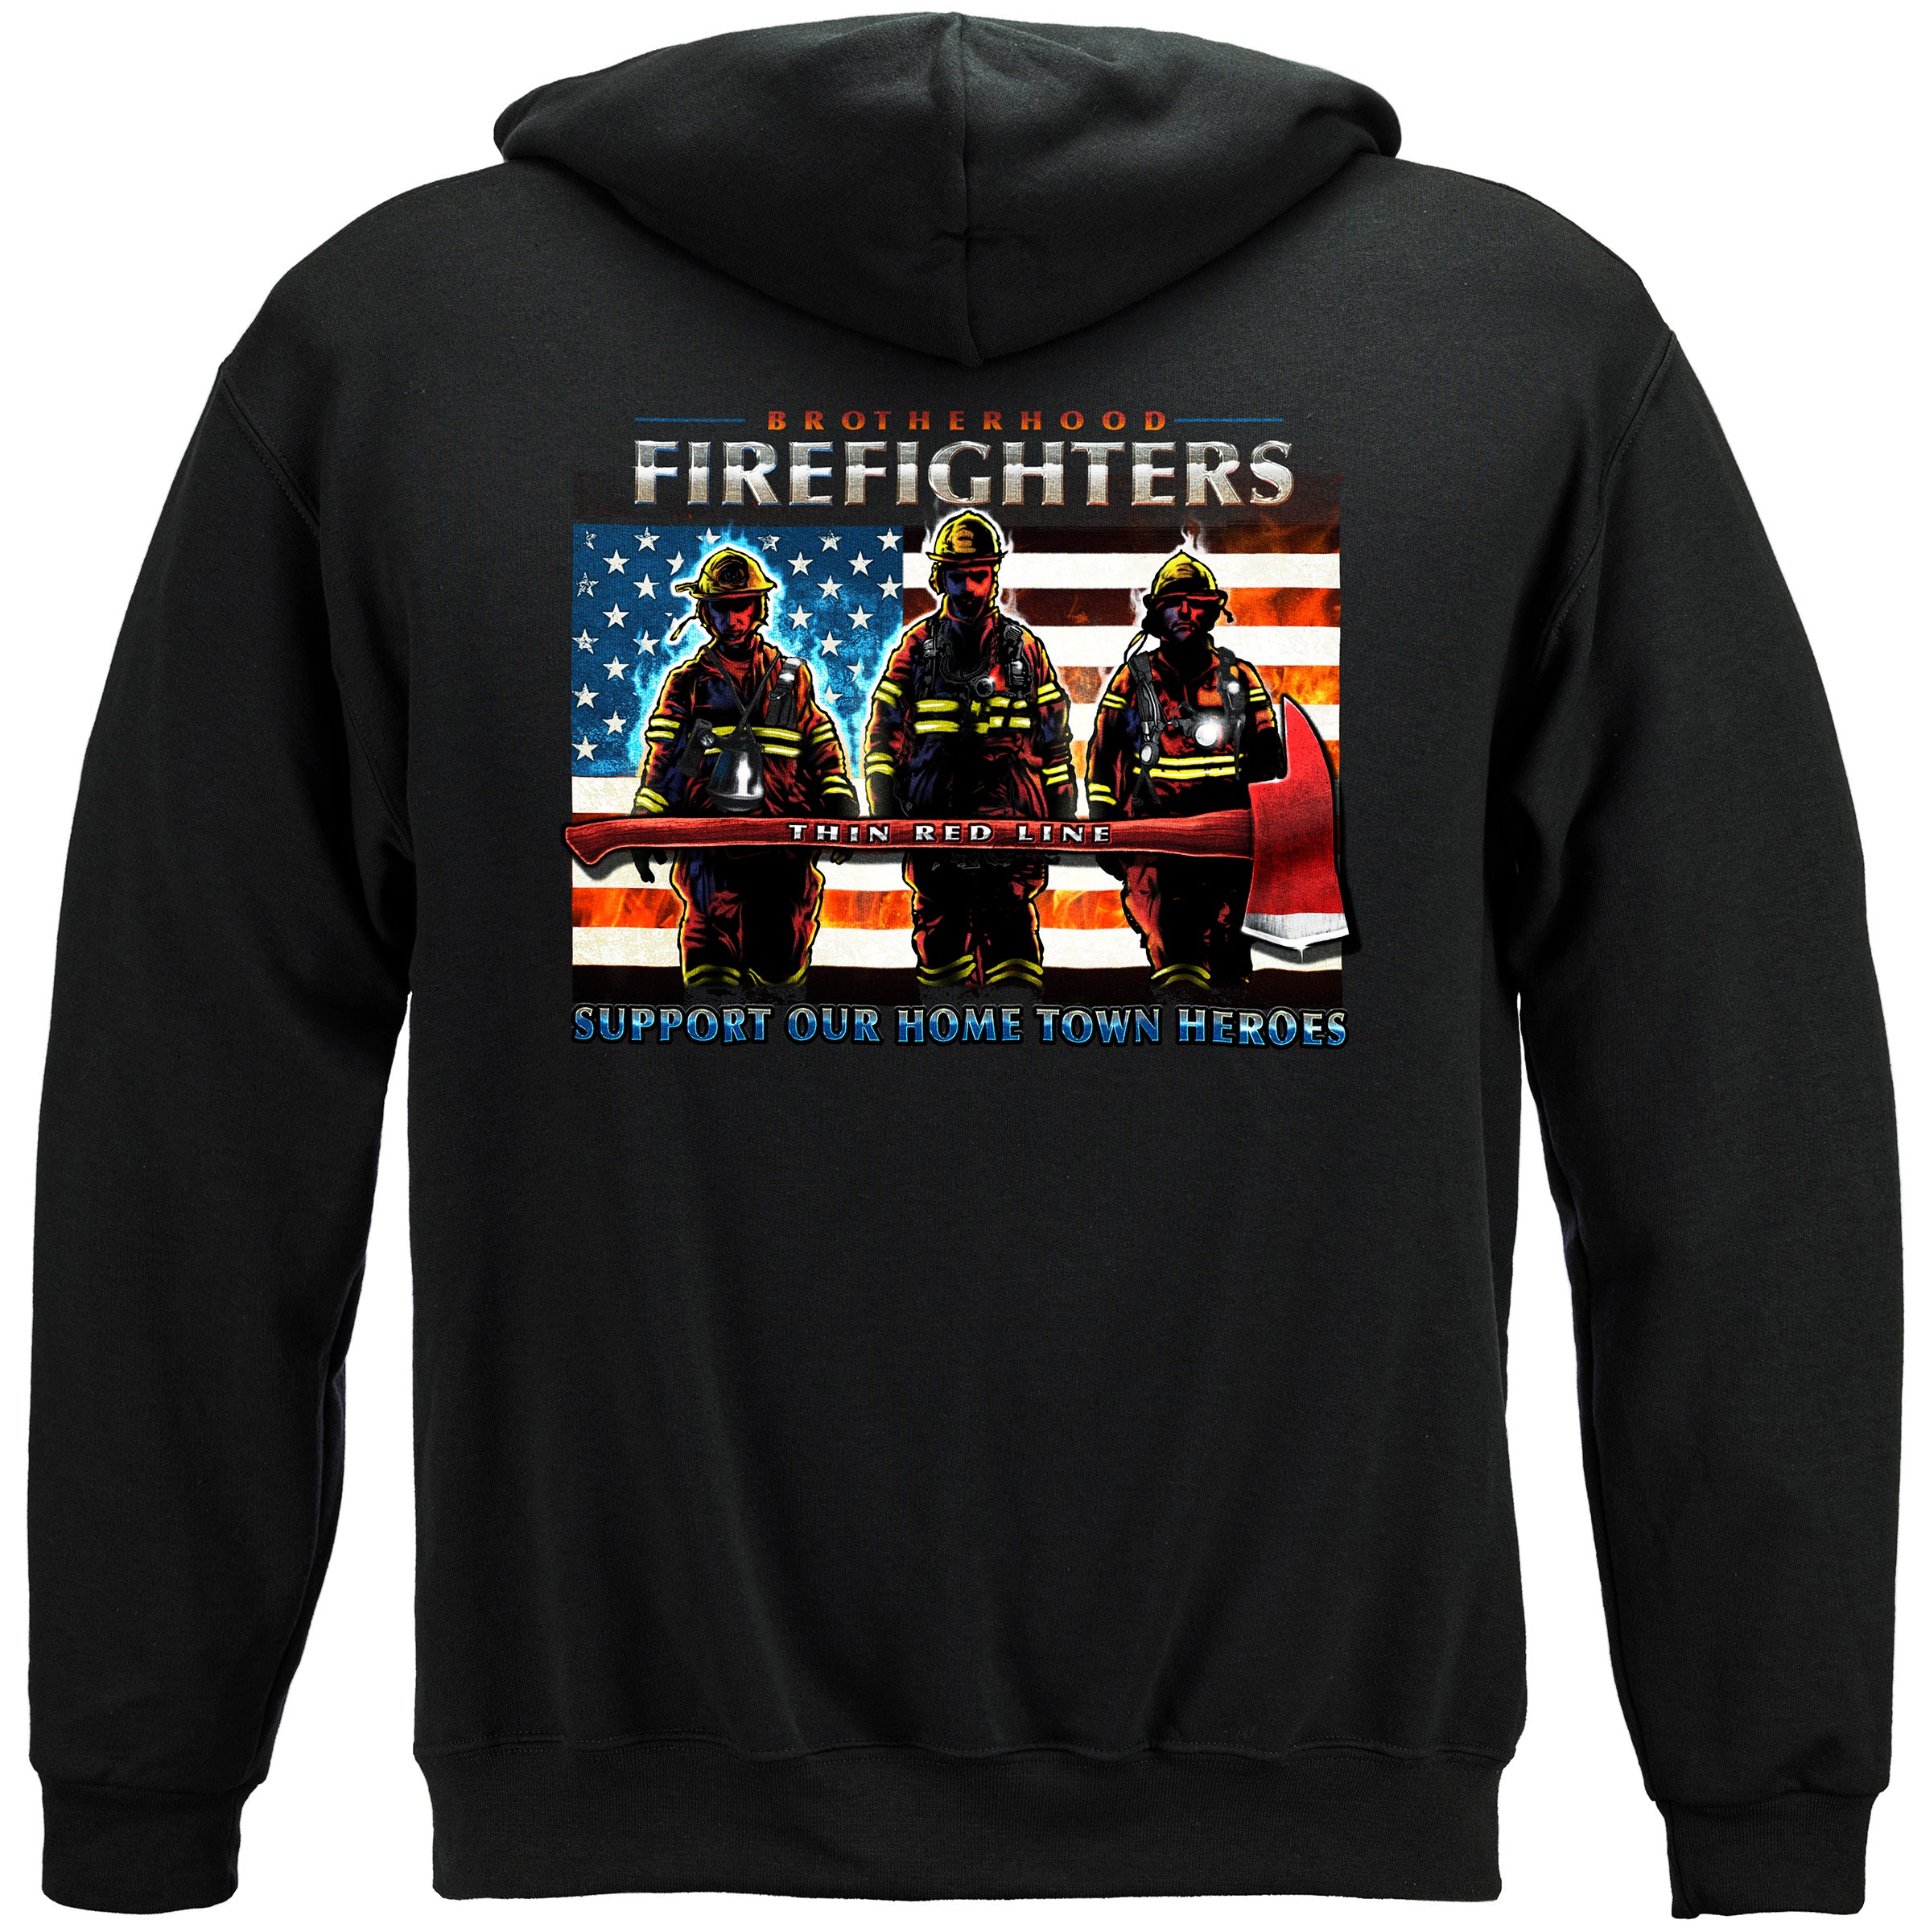 Image of Firefighter Thin Red Line Flag Patriotic Hooded Sweatshirt